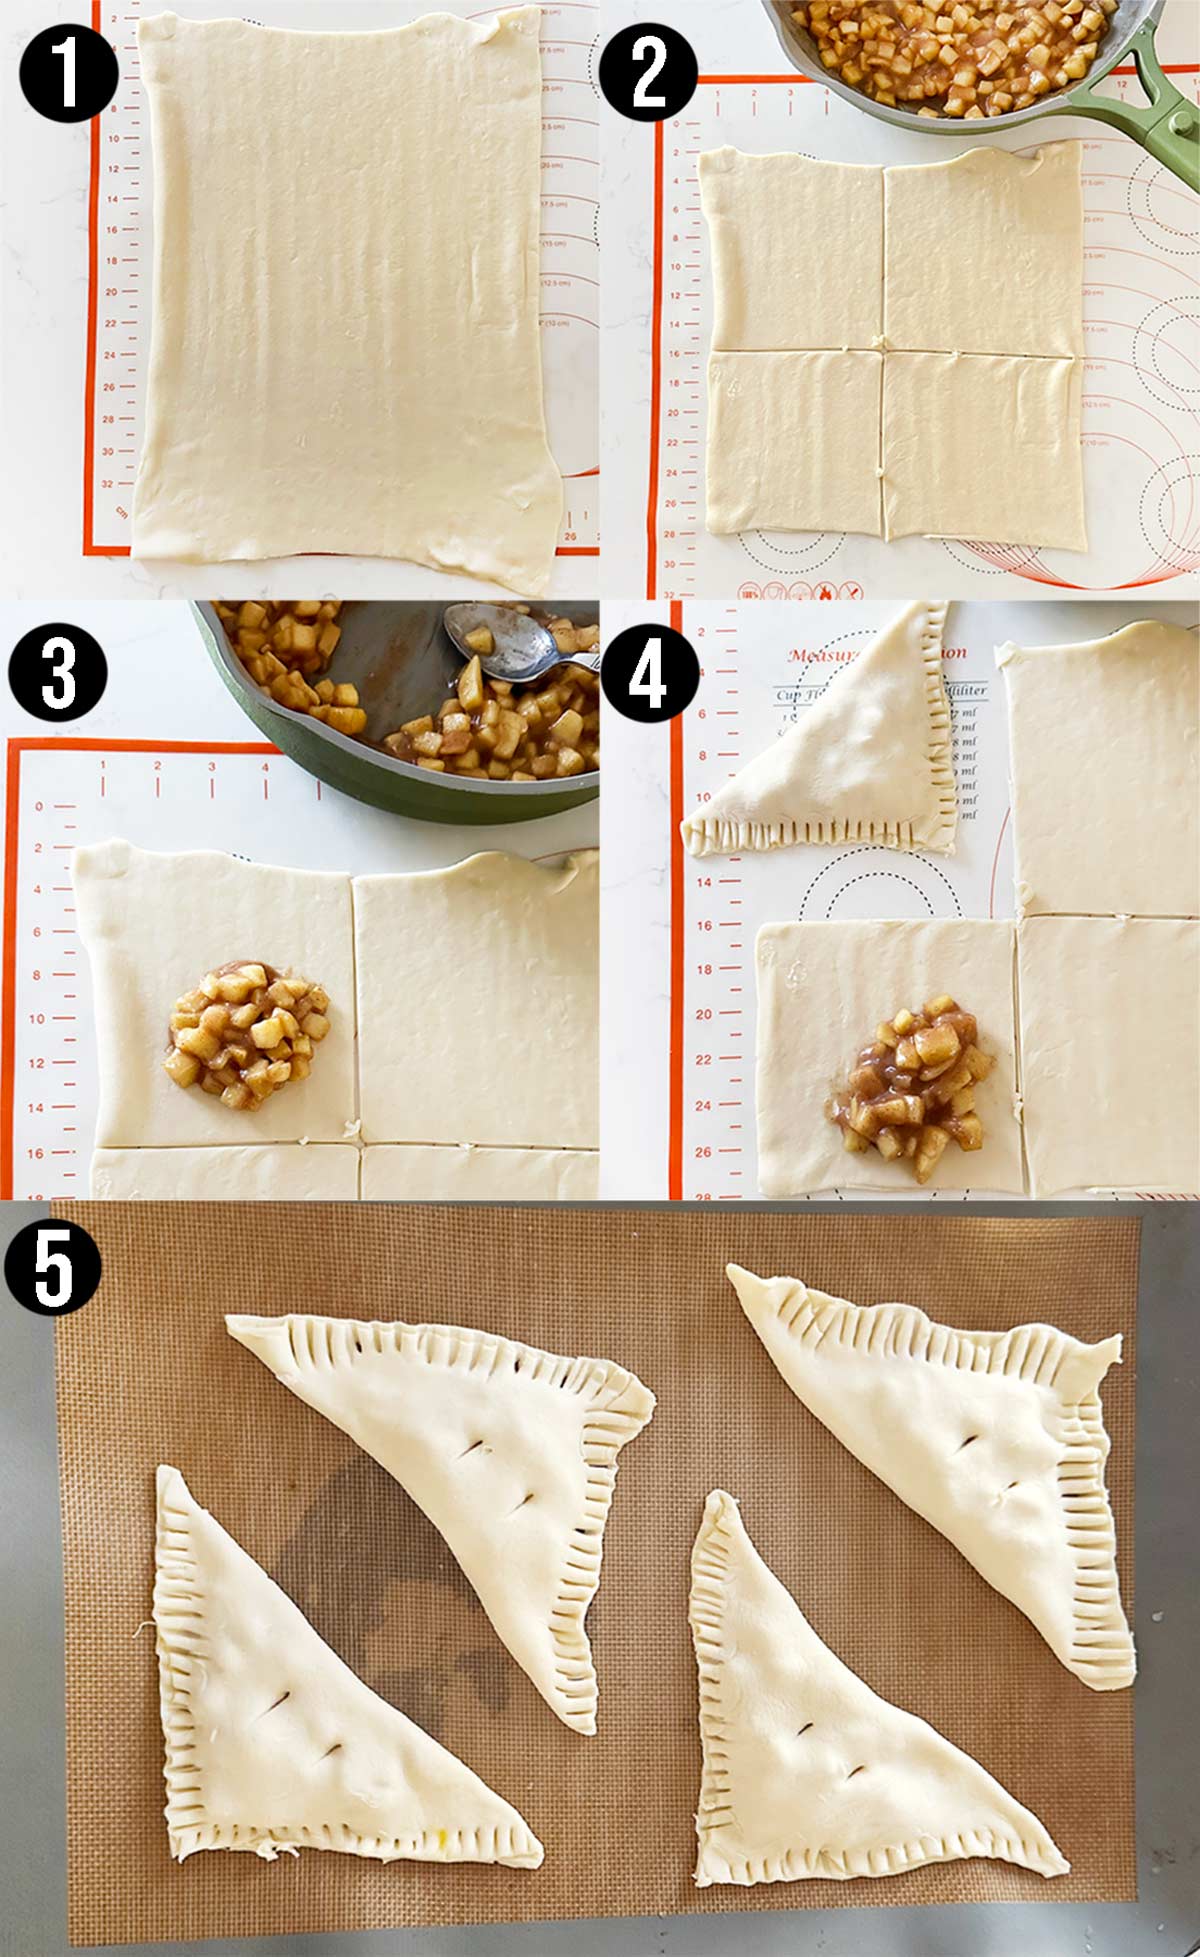 Step by step photos on how to make apple turnovers on a kitchen counter. 